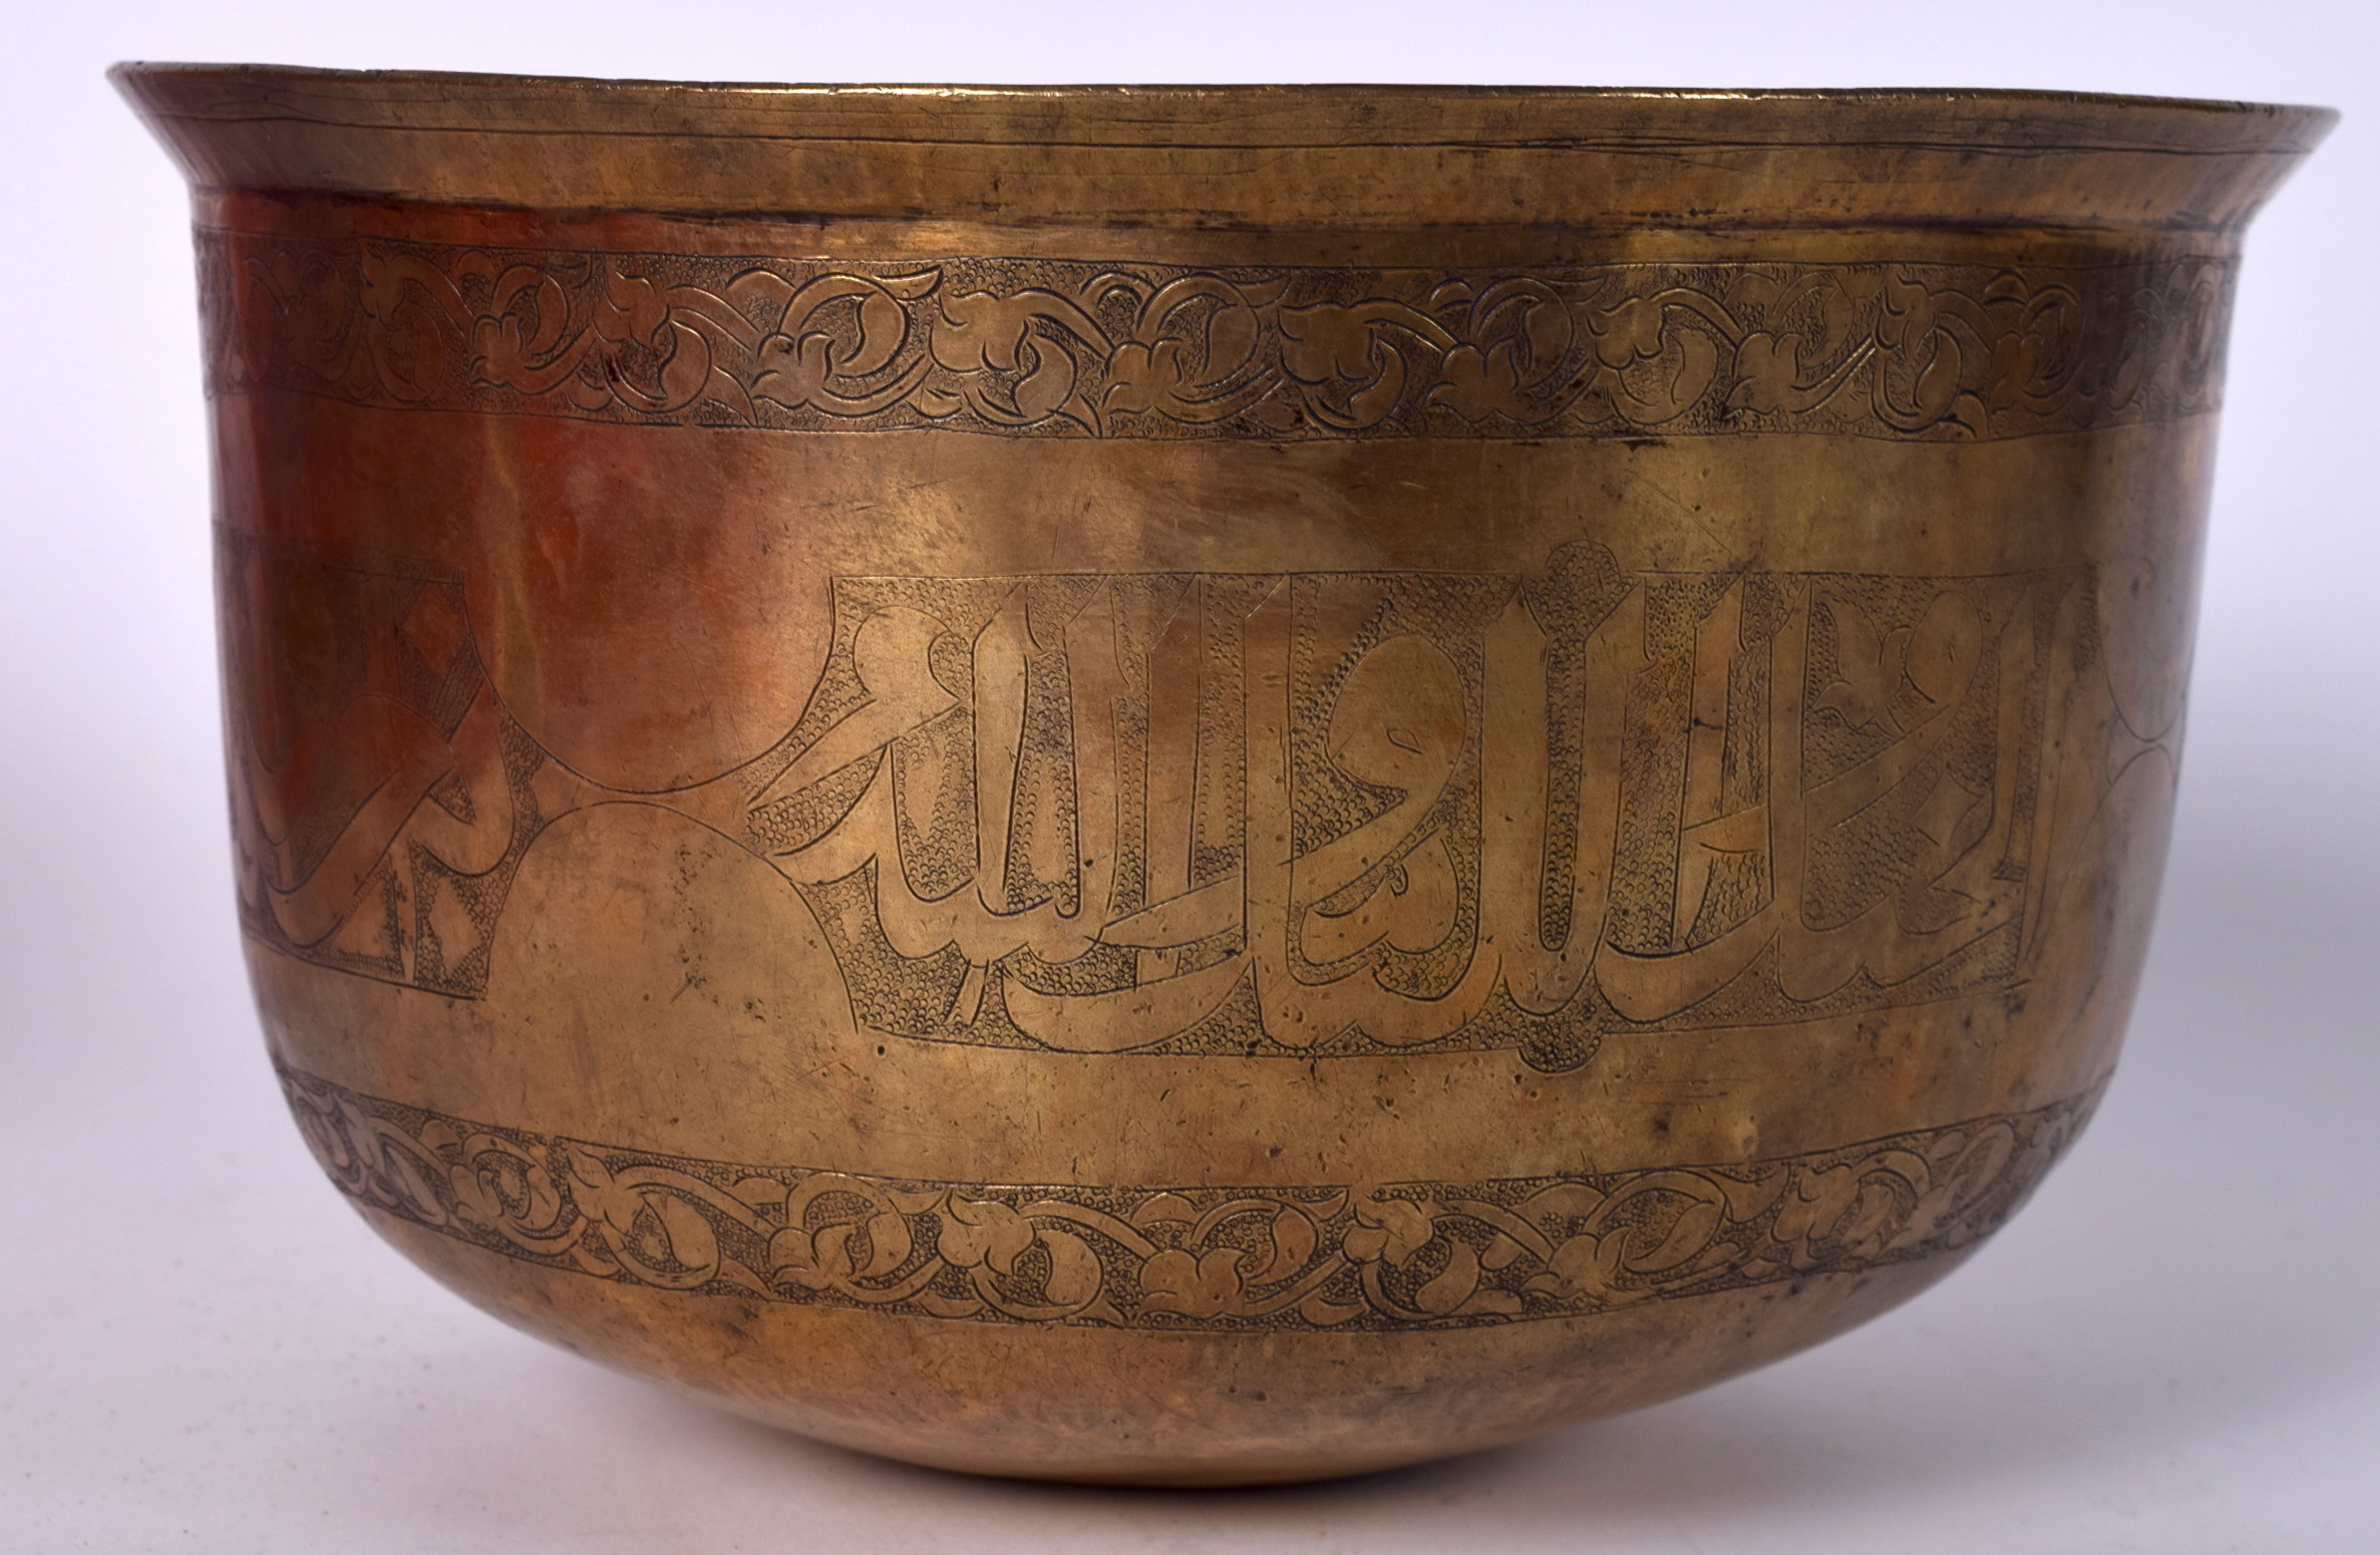 AN 18TH CENTURY ISLAMIC BRONZE BOWL, engraved with script within foliate banding. 13 cm x 22.5 cm.